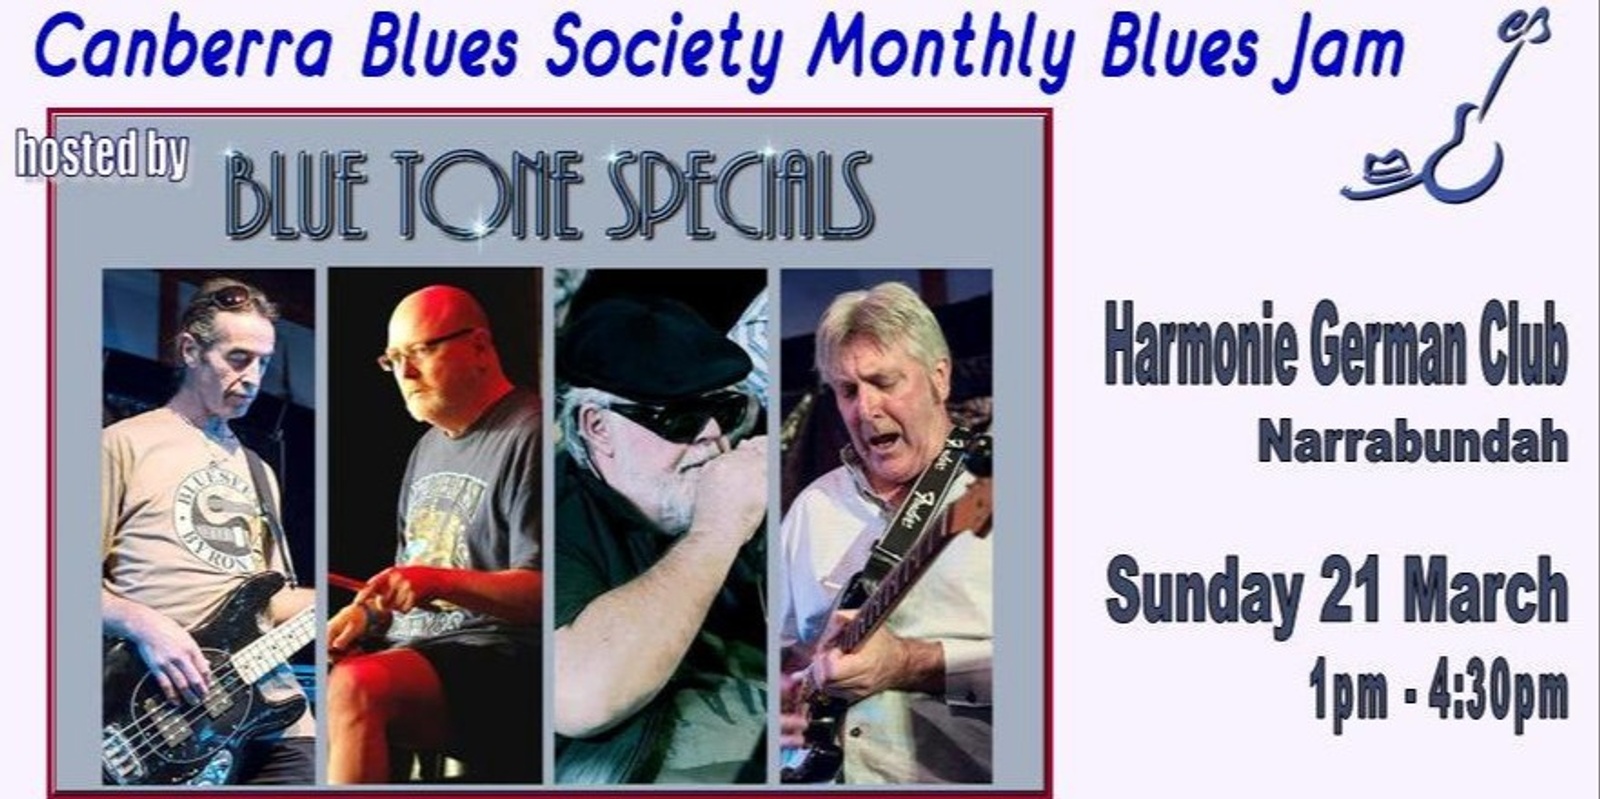 Banner image for CBS March Blues Jam hosted by Blue Tone Specials